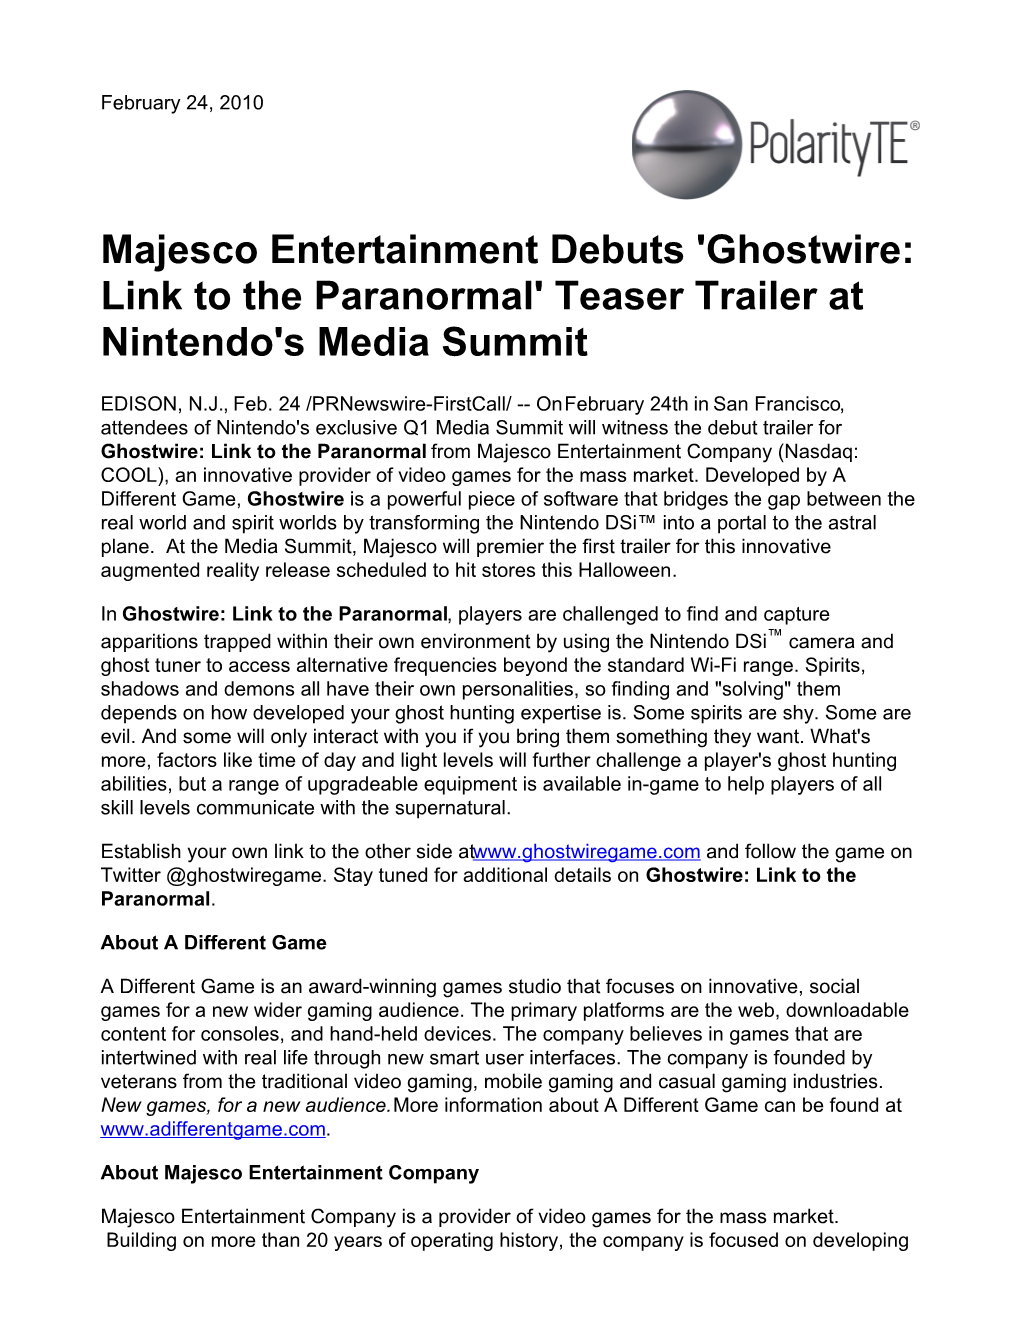 Majesco Entertainment Debuts 'Ghostwire: Link to the Paranormal' Teaser Trailer at Nintendo's Media Summit